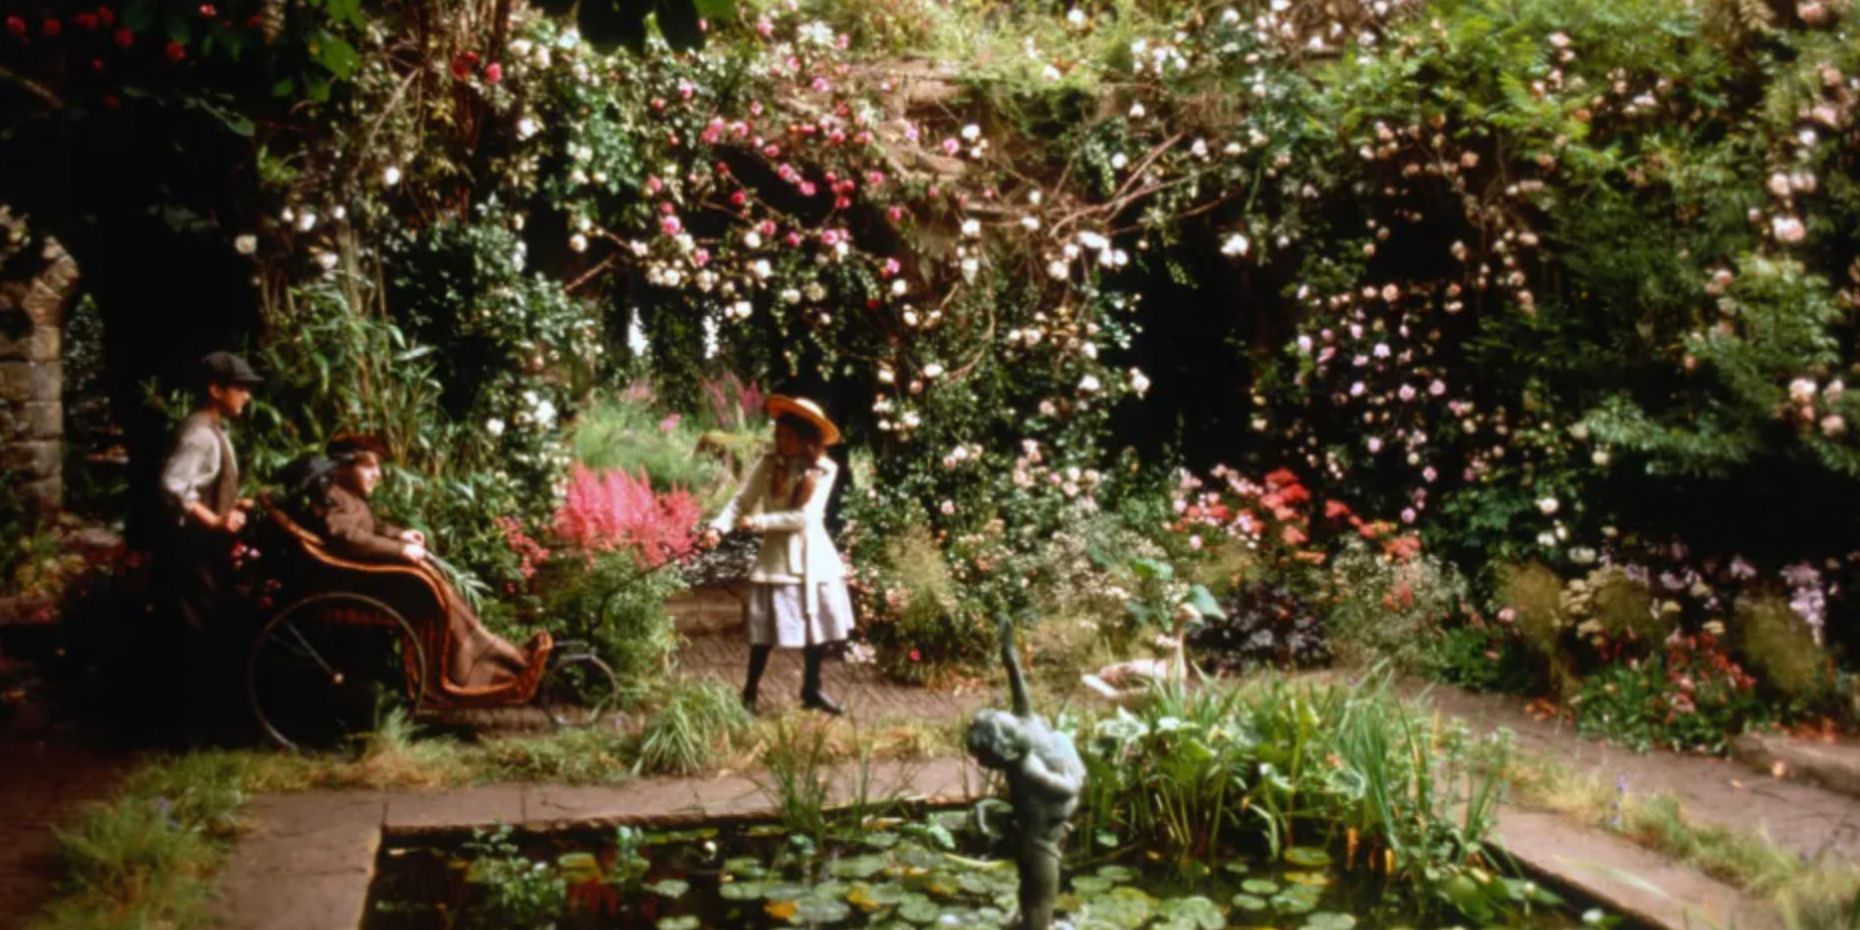 Mary pulls her cousin and his wheelchair into the secret garden while Dickon pushes in The Secret Garden